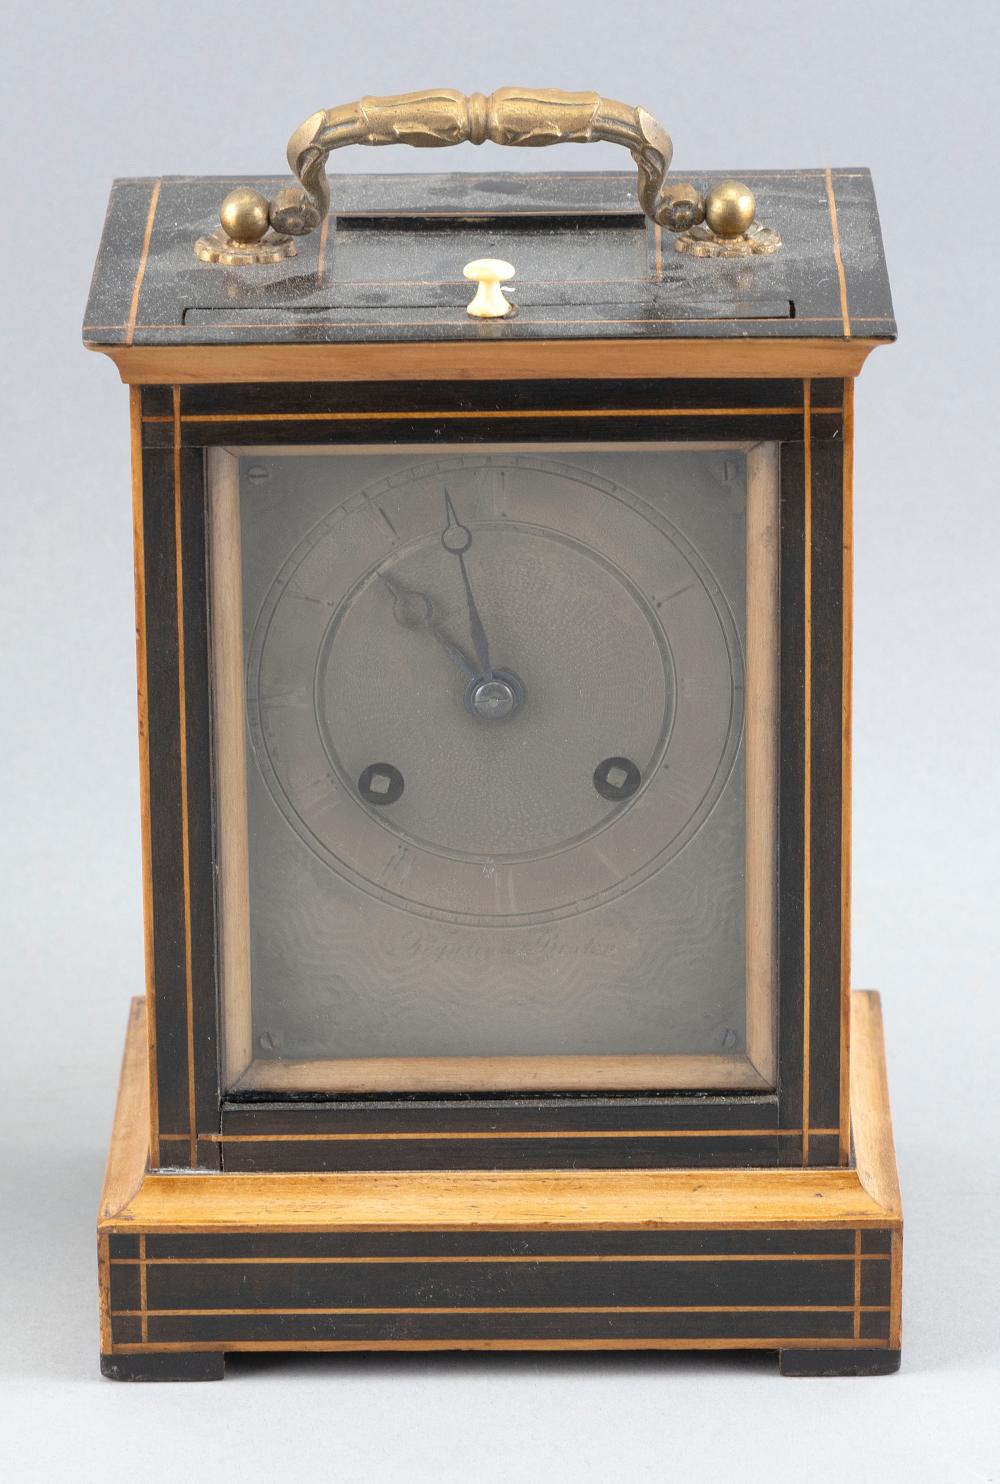 FRENCH CARRIAGE CLOCK SECOND HALF